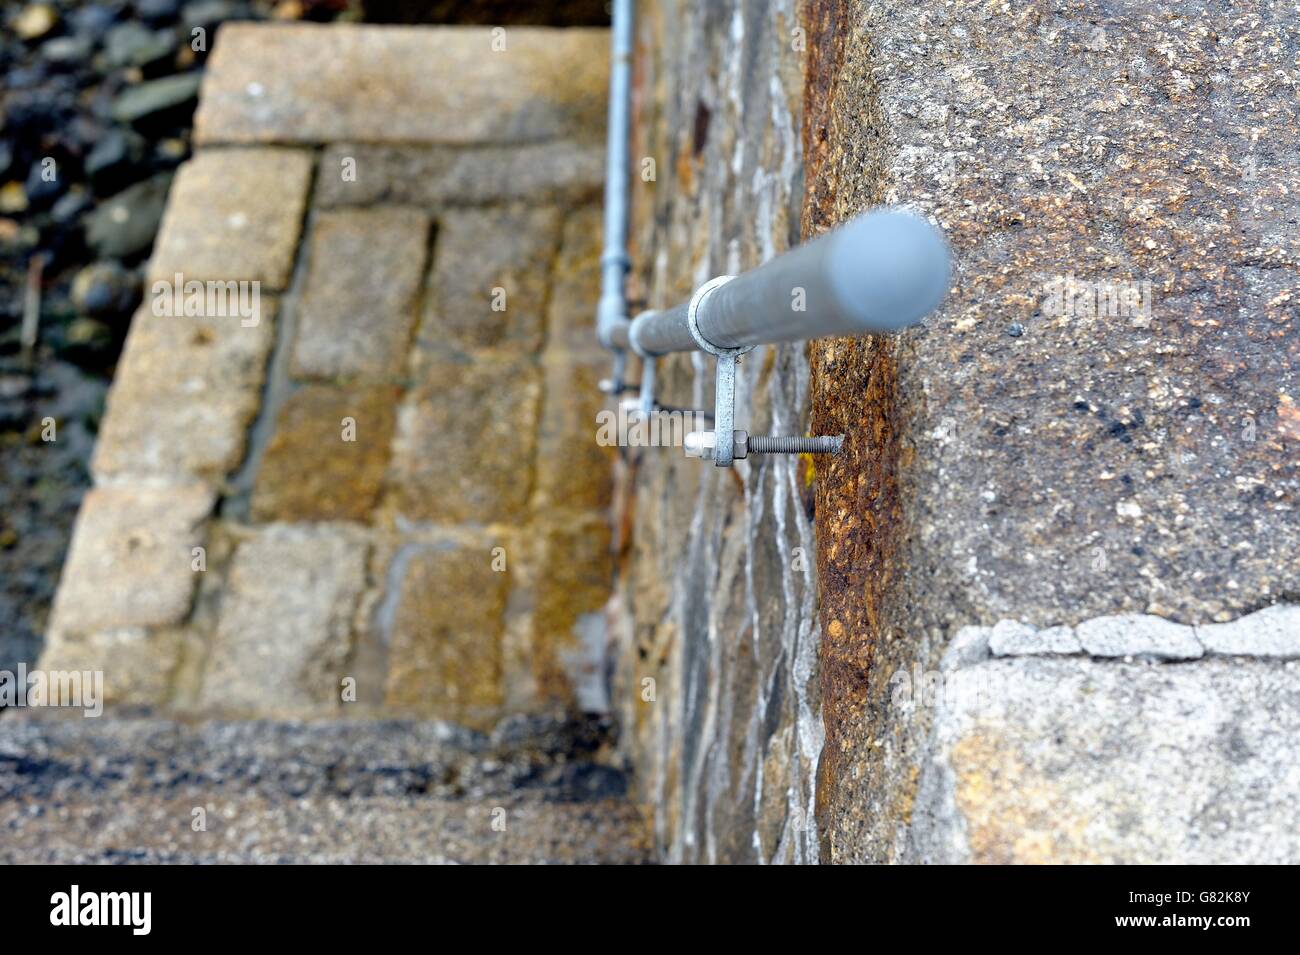 A handrail attached to a sea wall with steps down to the harbour Porthleven Cornwall England UK. Stock Photo